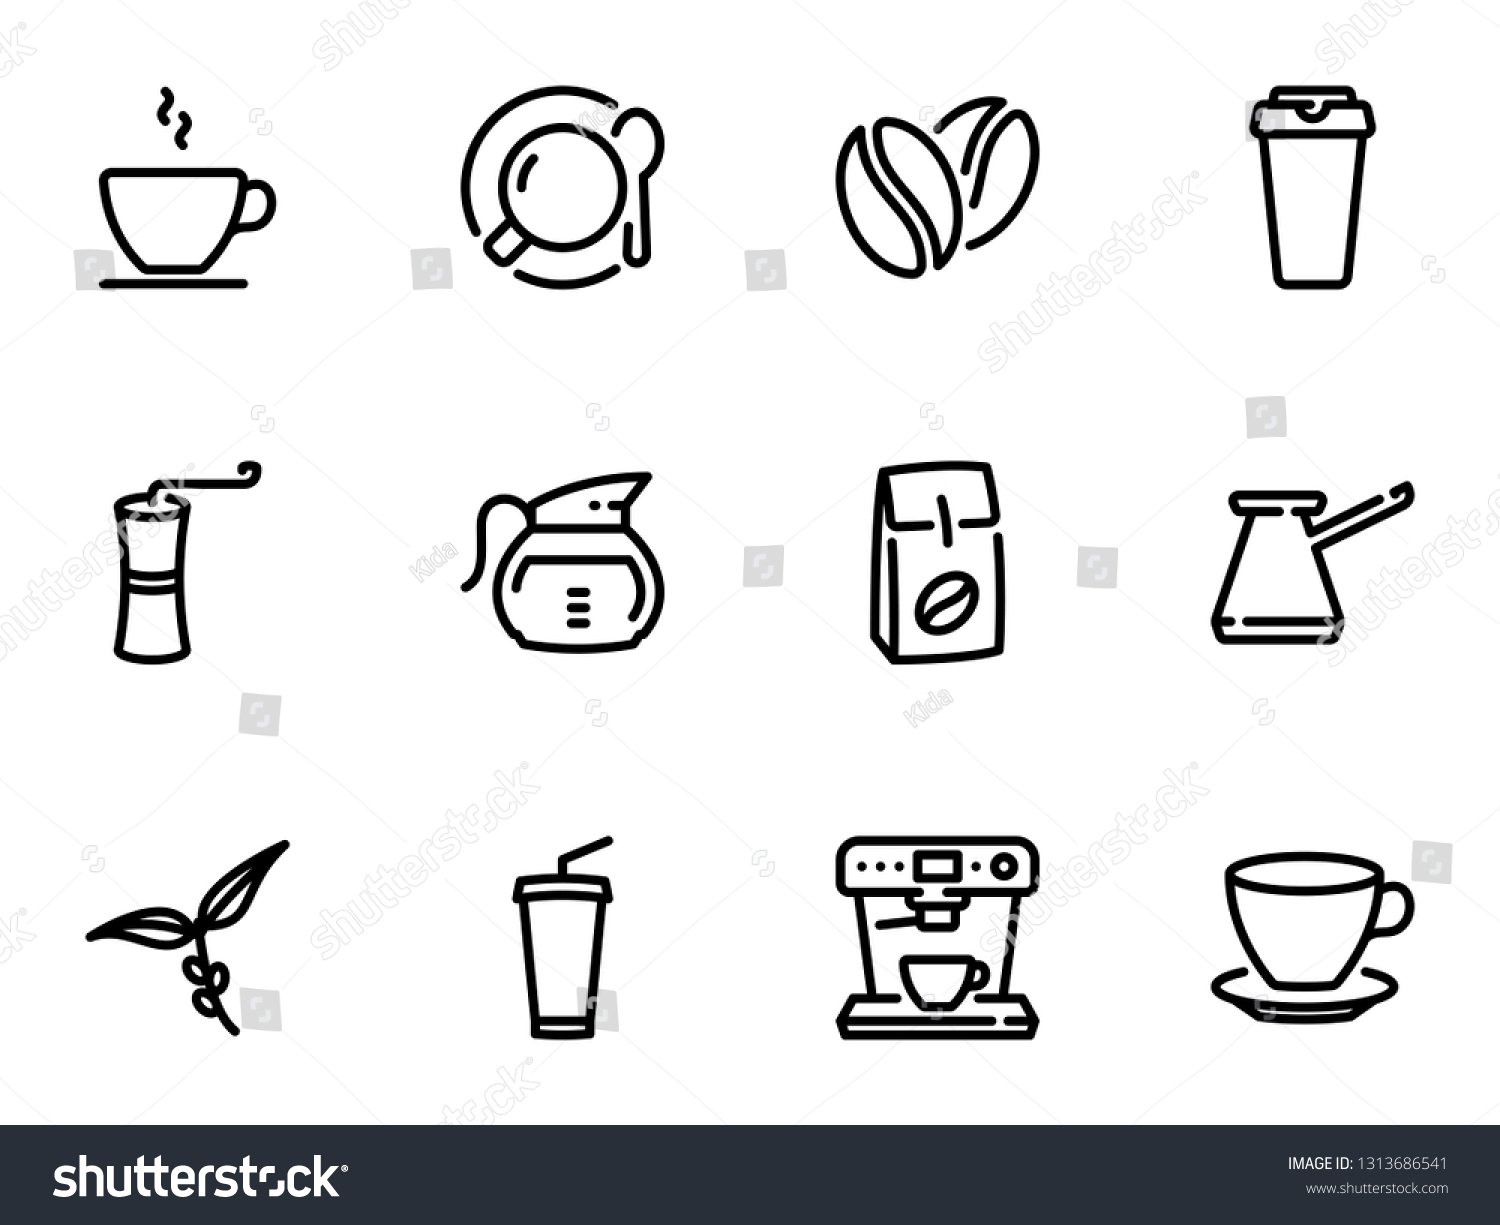 SVG of Set of black vector icons, isolated against white background. Illustration on a theme Coffee. Line, outline, stroke, pictogram svg